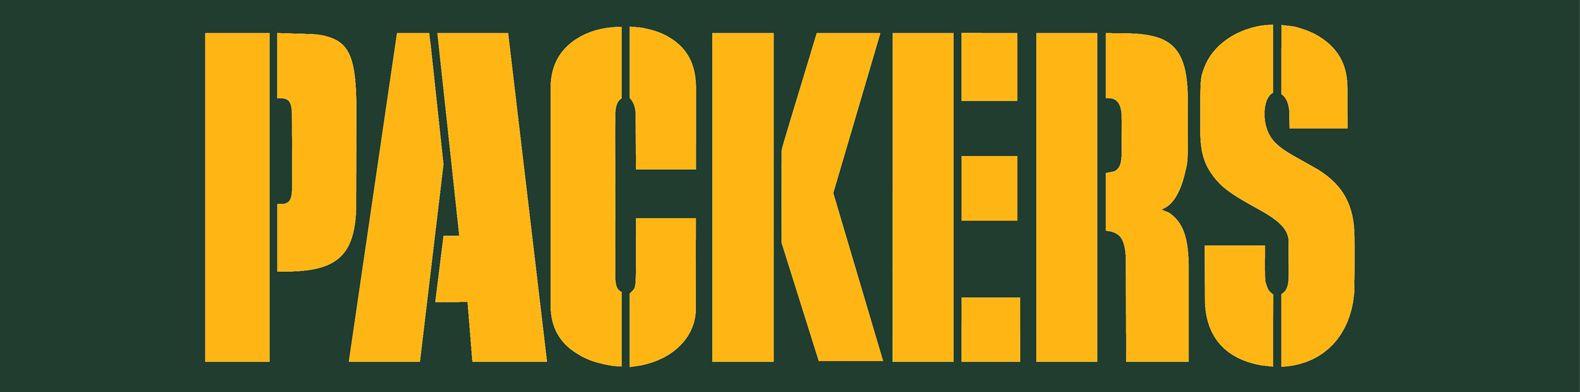 Packers Logo - Green Bay Packers Logo, Green Bay Packers Symbol Meaning, History